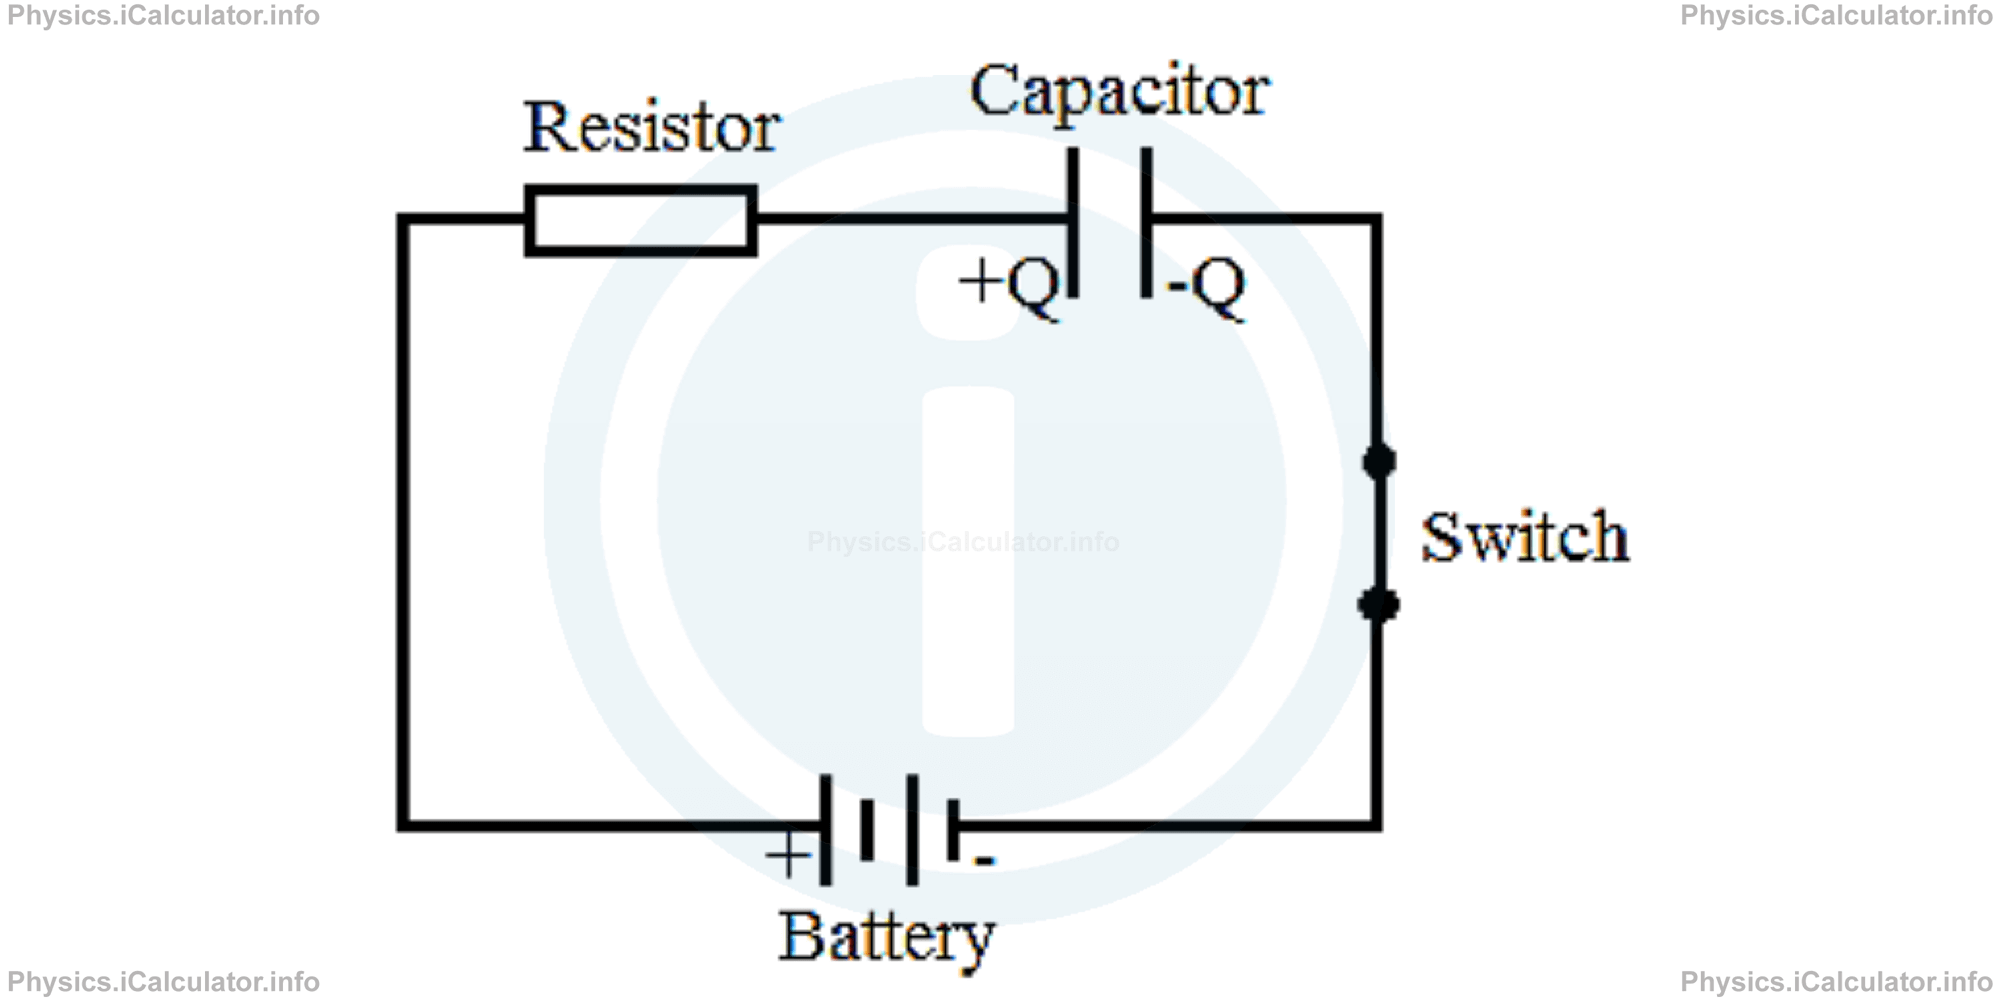 Physics Tutorials: This image provides visual information for the physics tutorial RC Circuits 